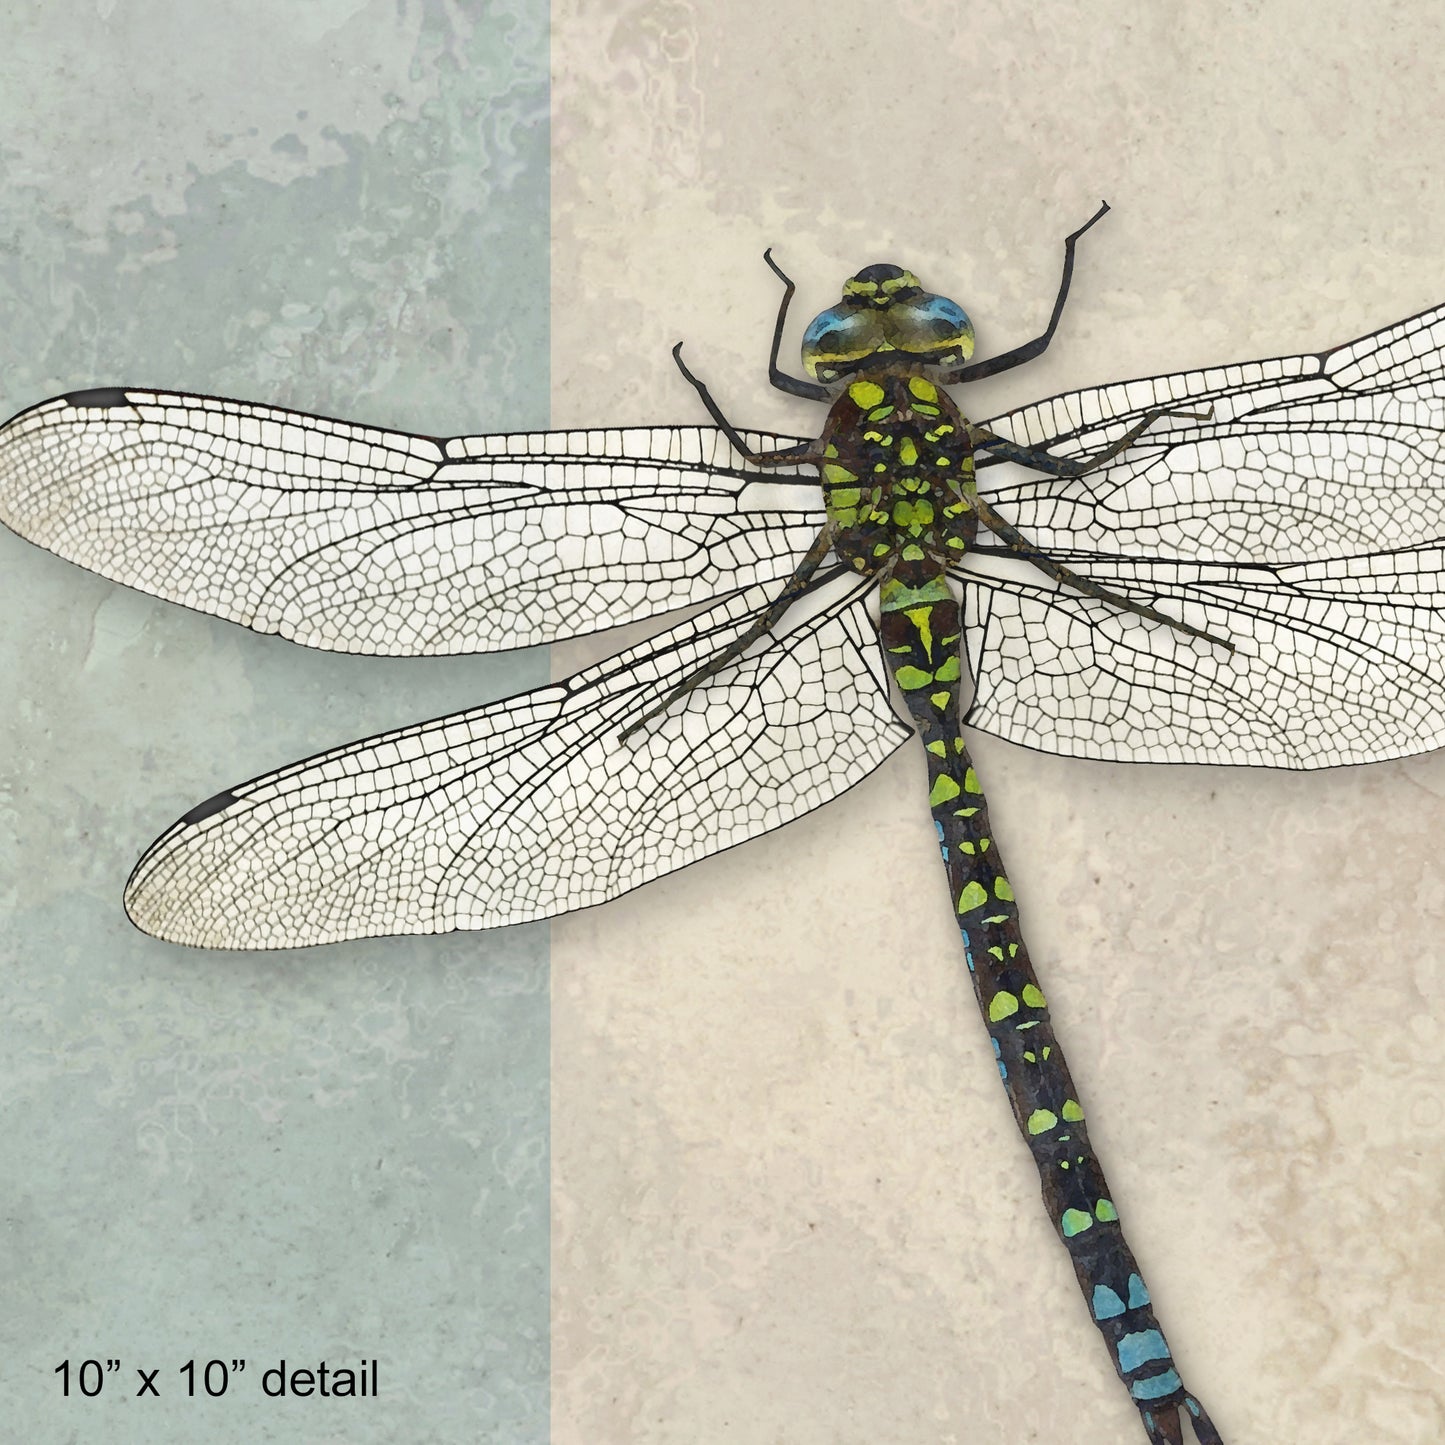 Set of 2 Dragonfly Designer Pillows, 18"x18" and 20"x14"